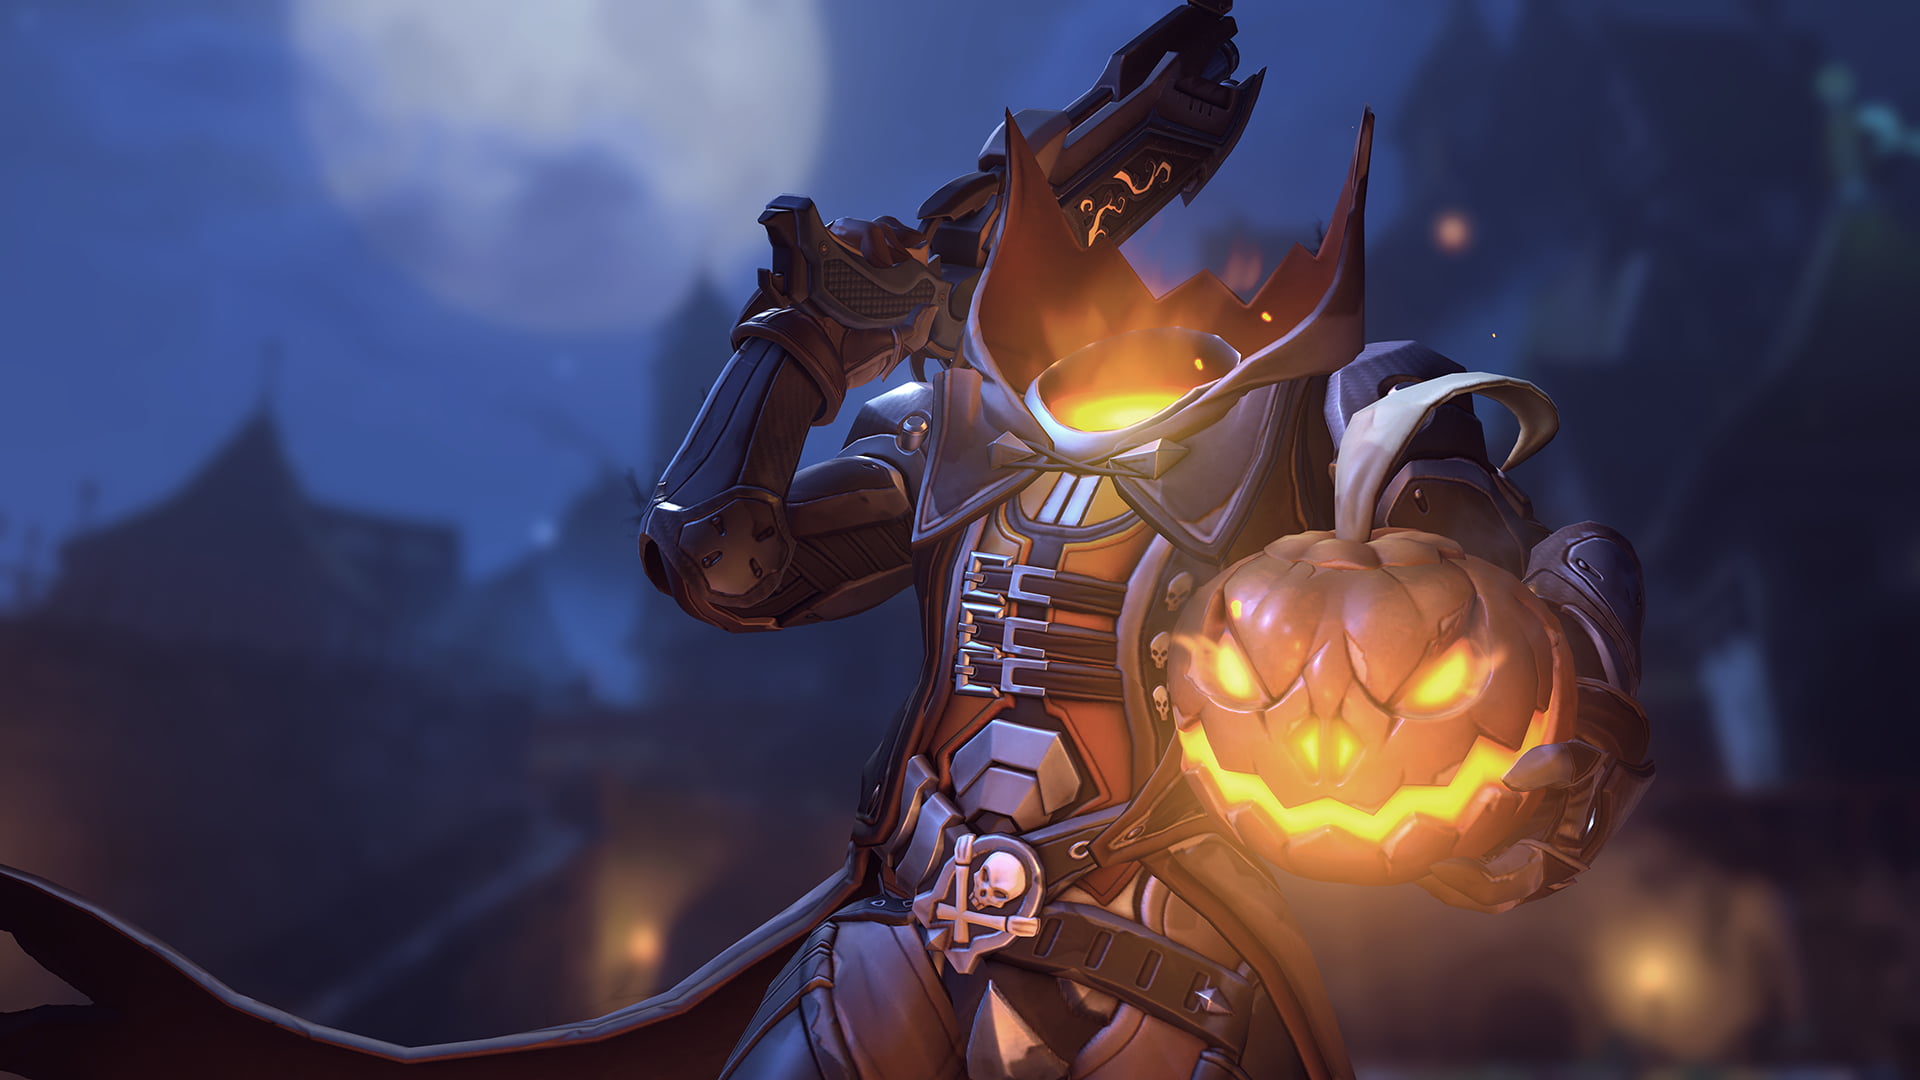 Pumpkin head armored character graphic poster Reaper Overwatch